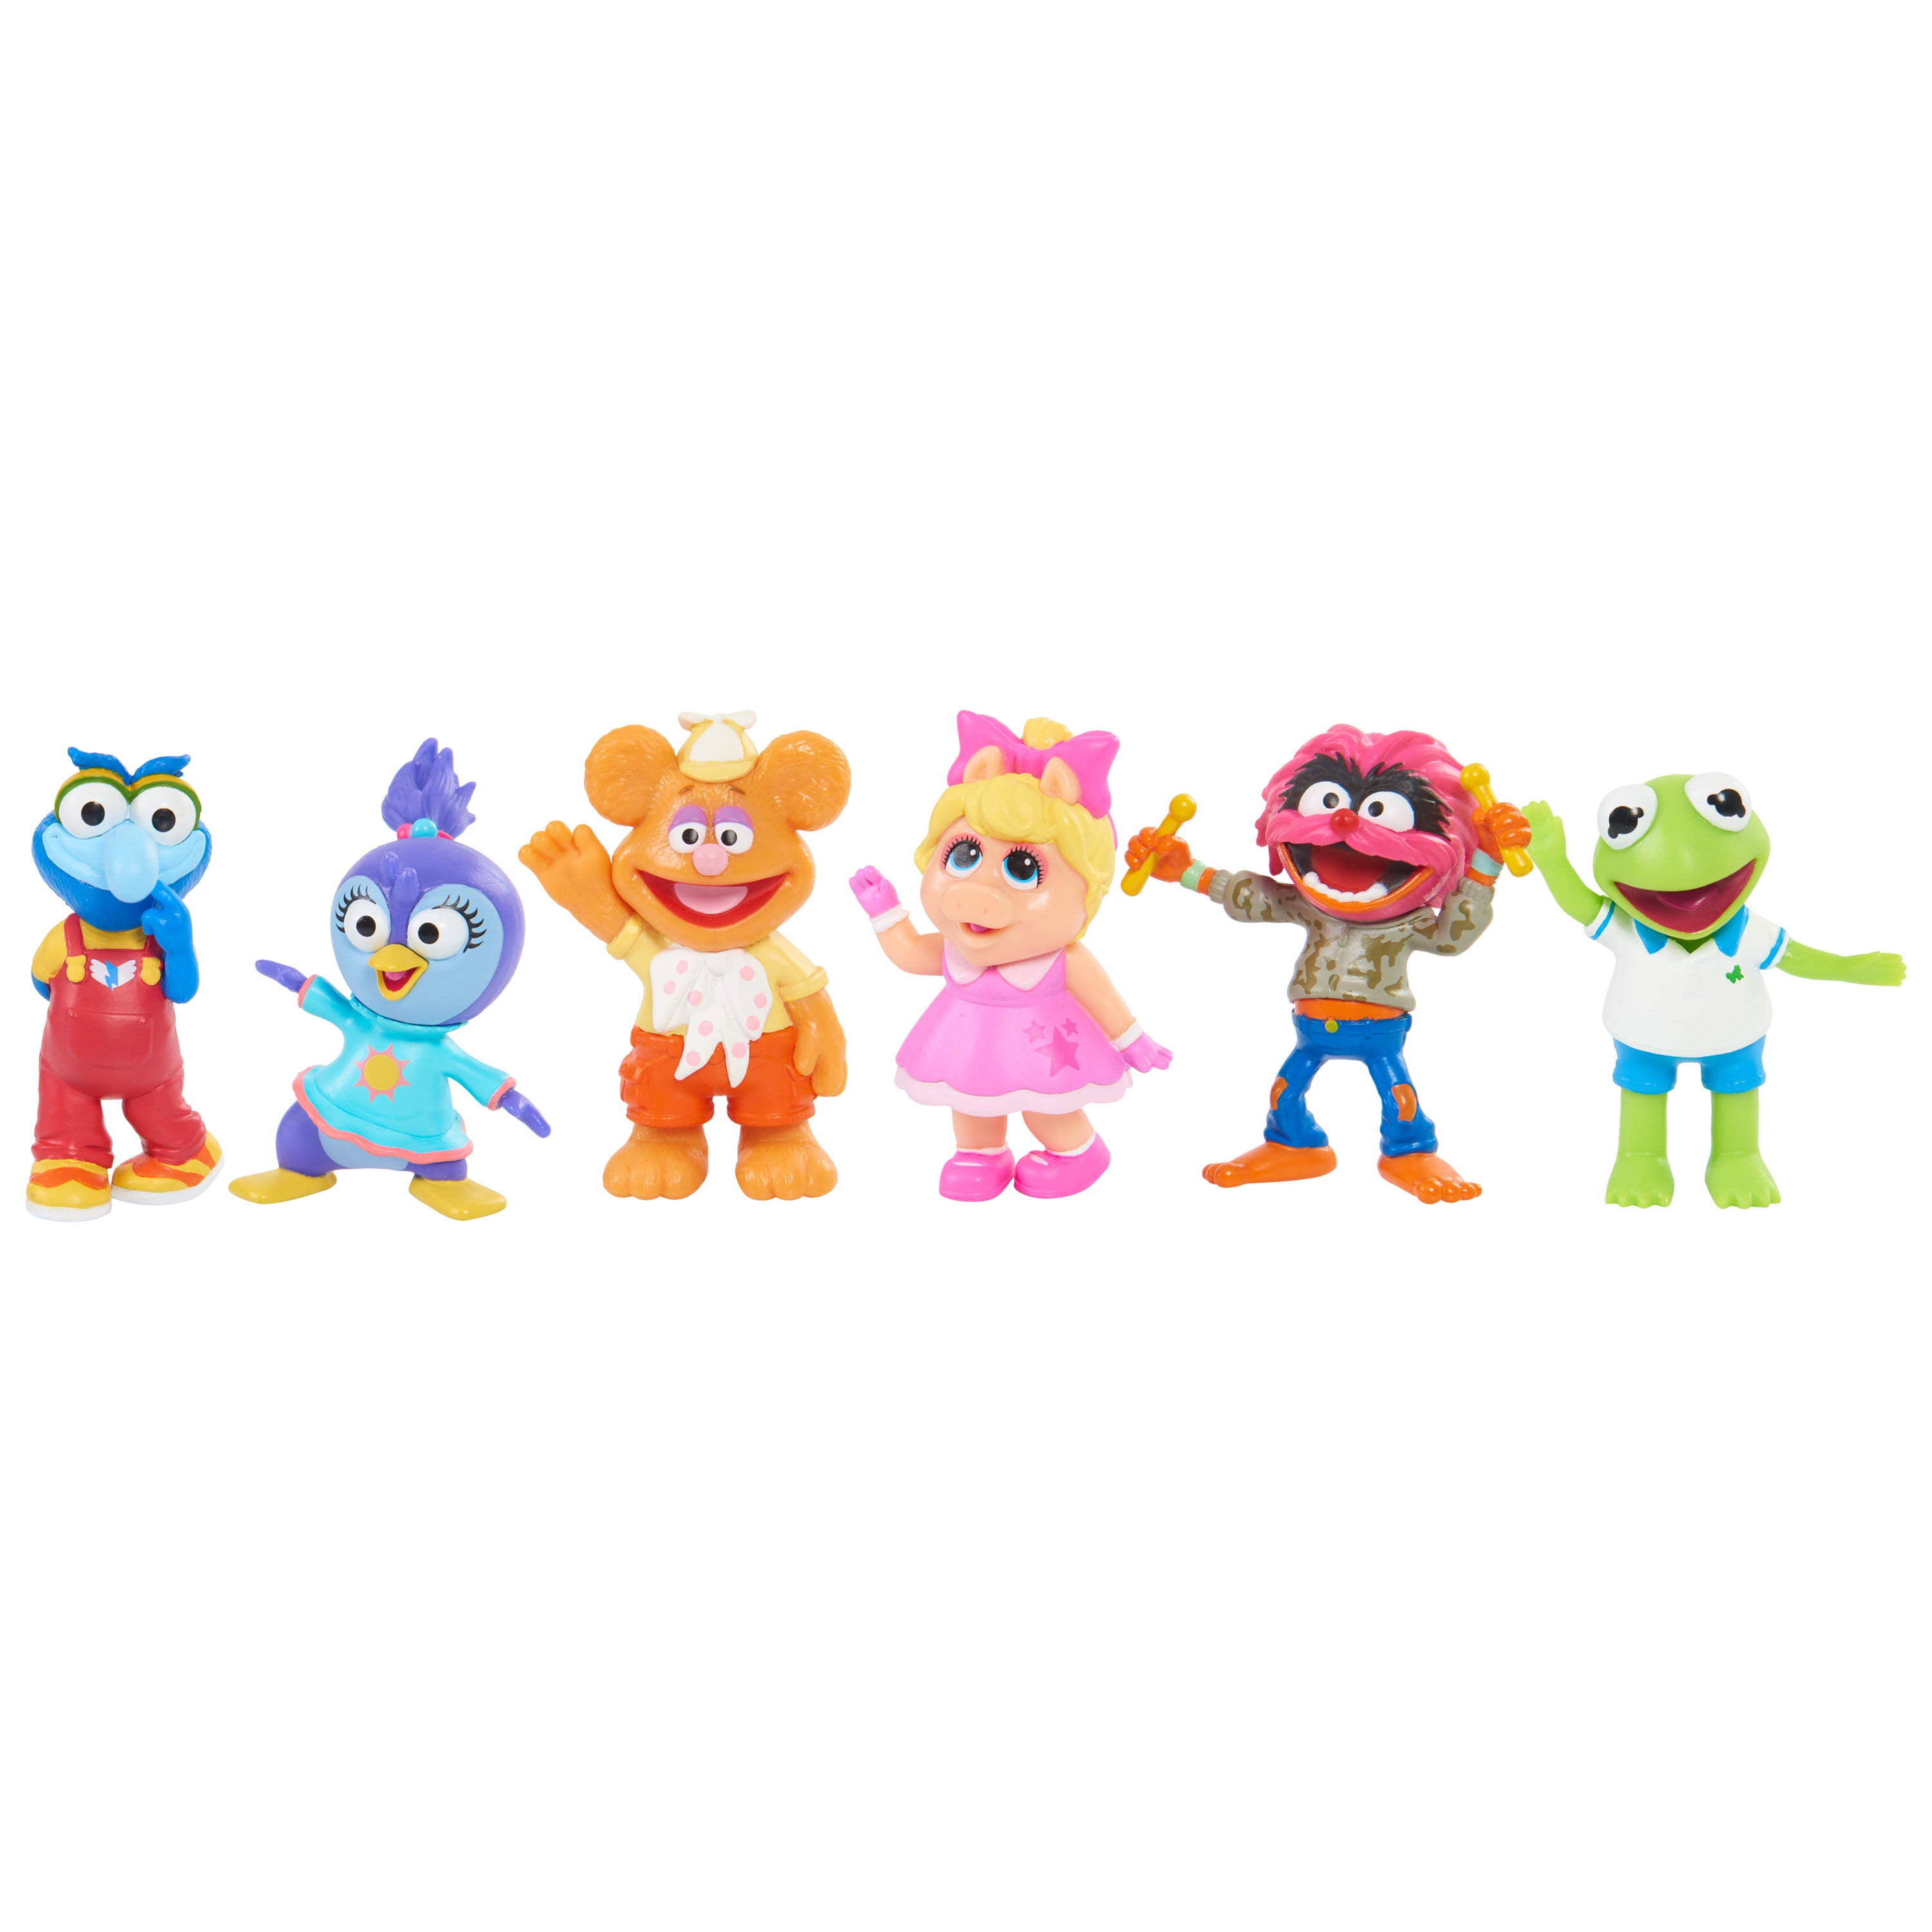 Muppets Babies Playroom Figure Set, 6 Pieces Include Kermit, Piggy, Fozzie,  Animal, Summer Penguin, and Gonzo, Officially Licensed Kids Toys for Ages 3  Up, Gifts and Presents 